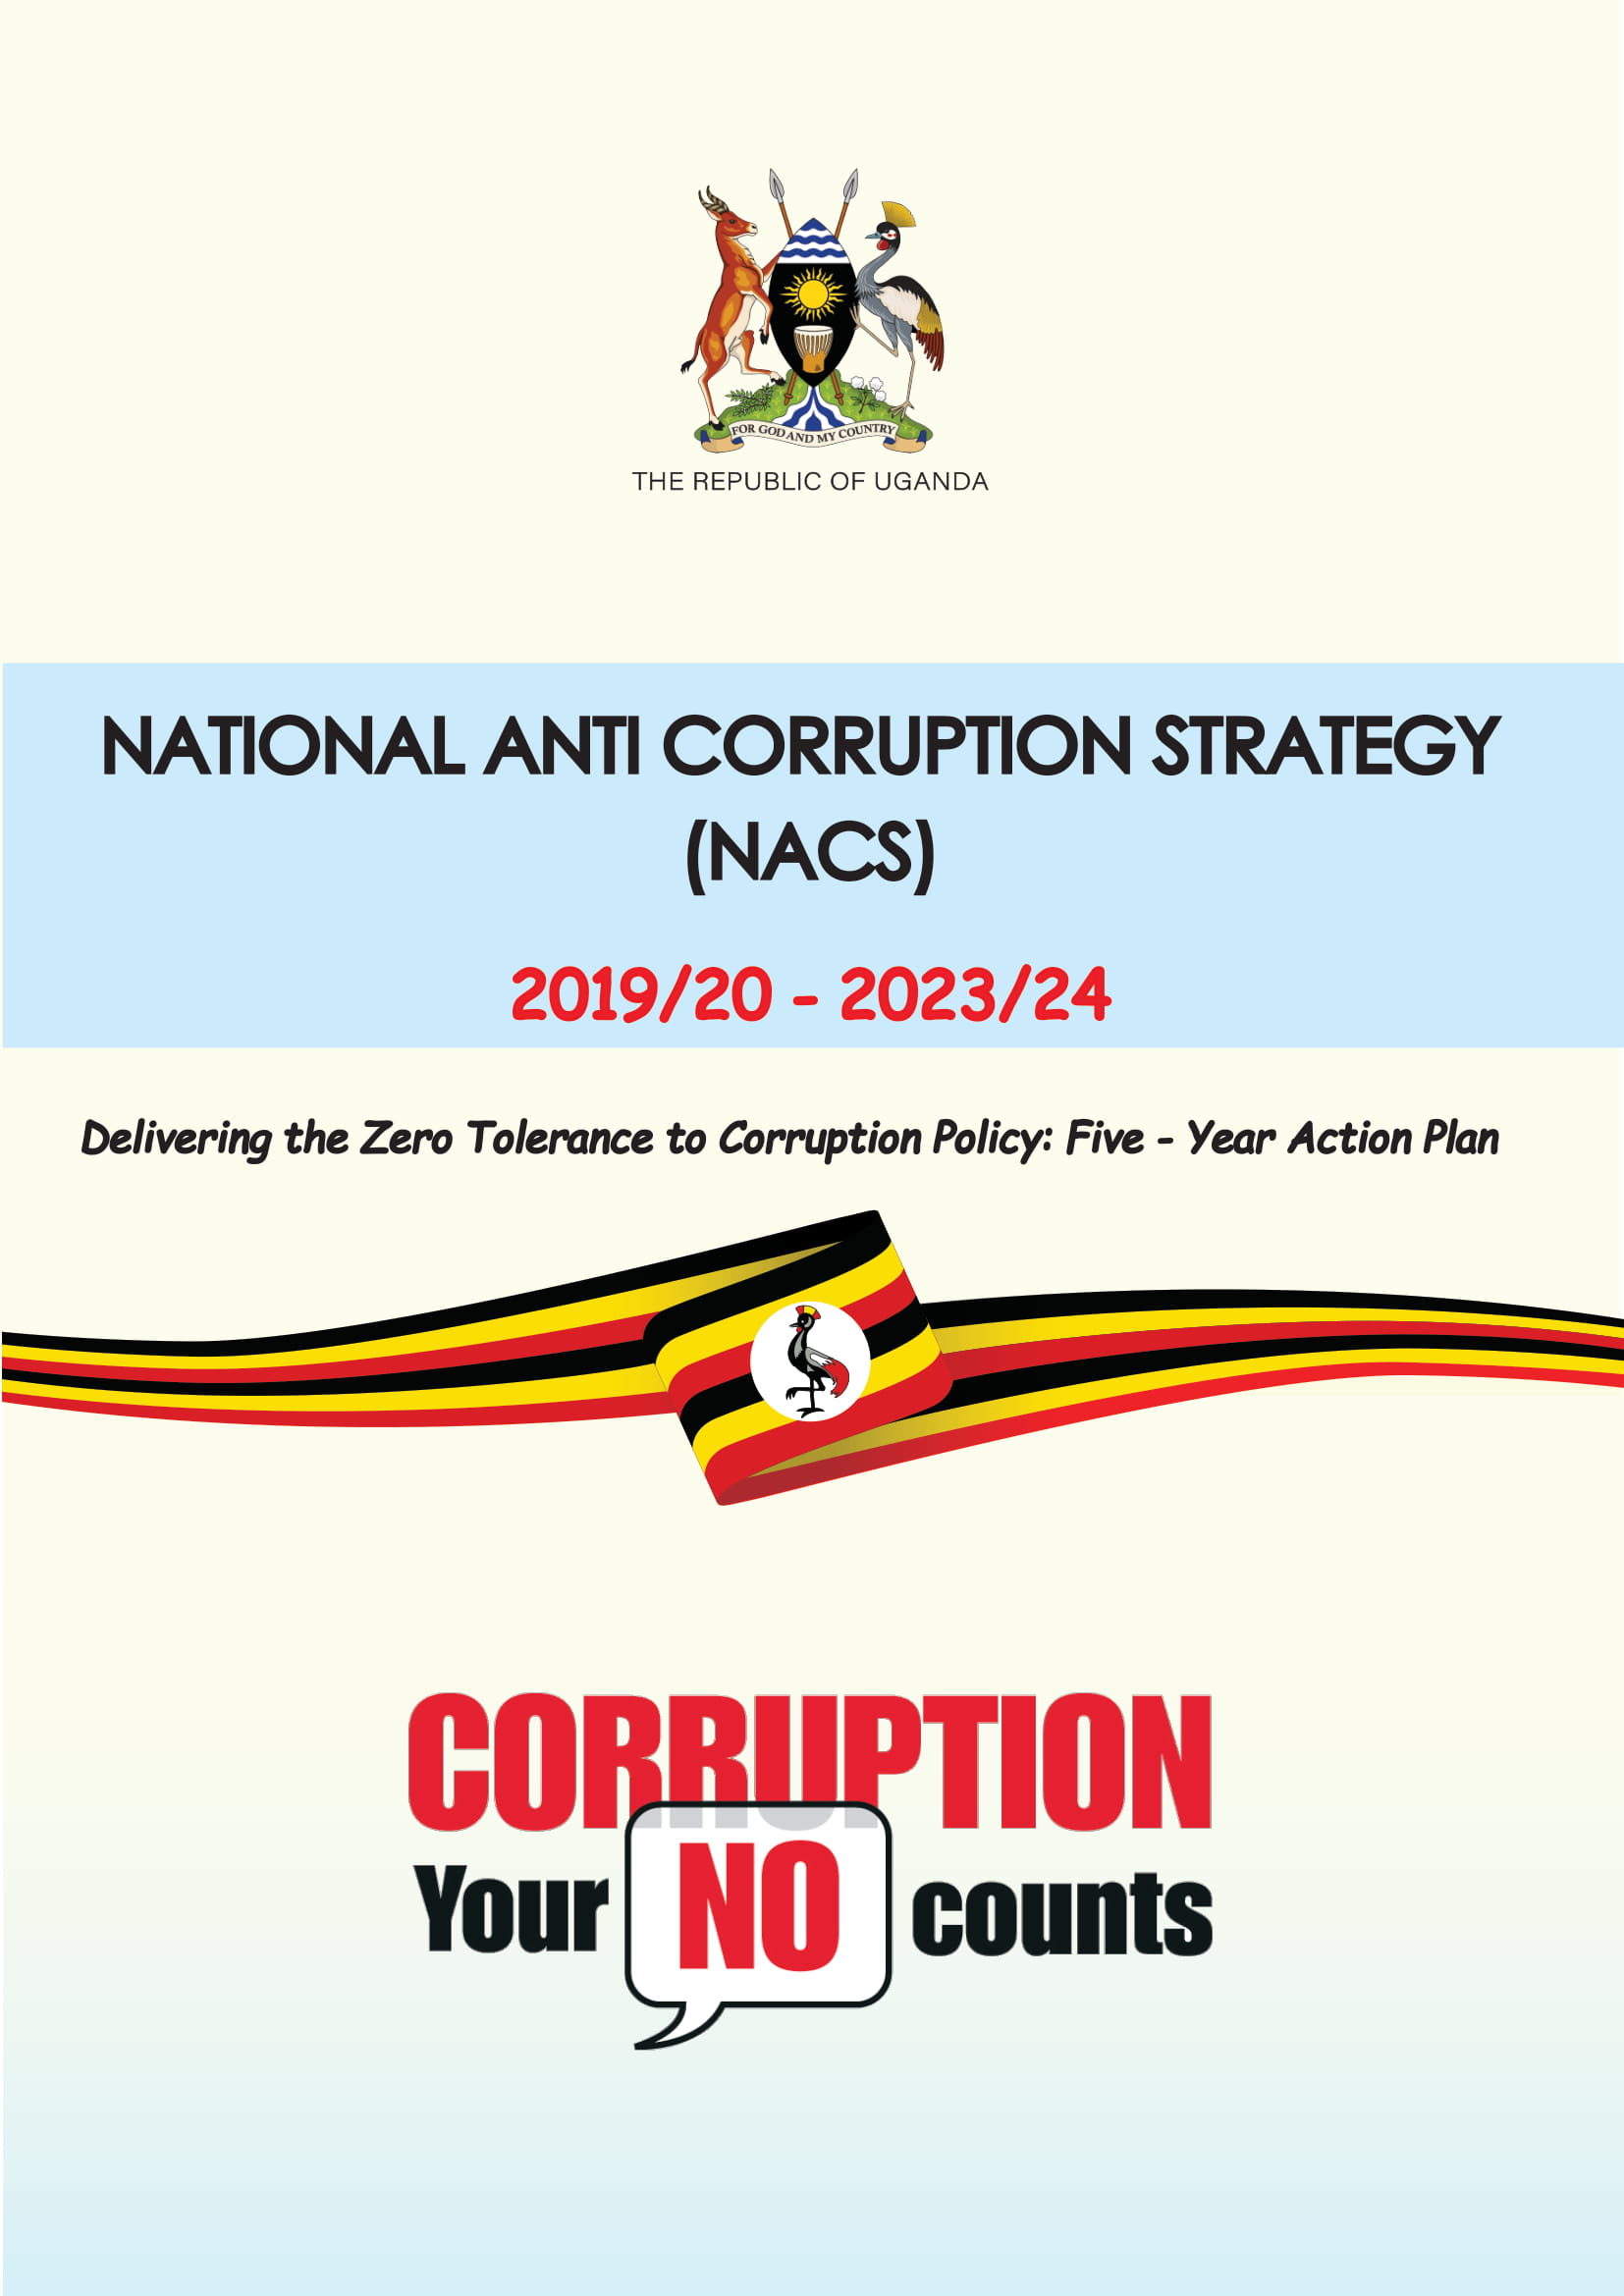 Click here to download the NACS.